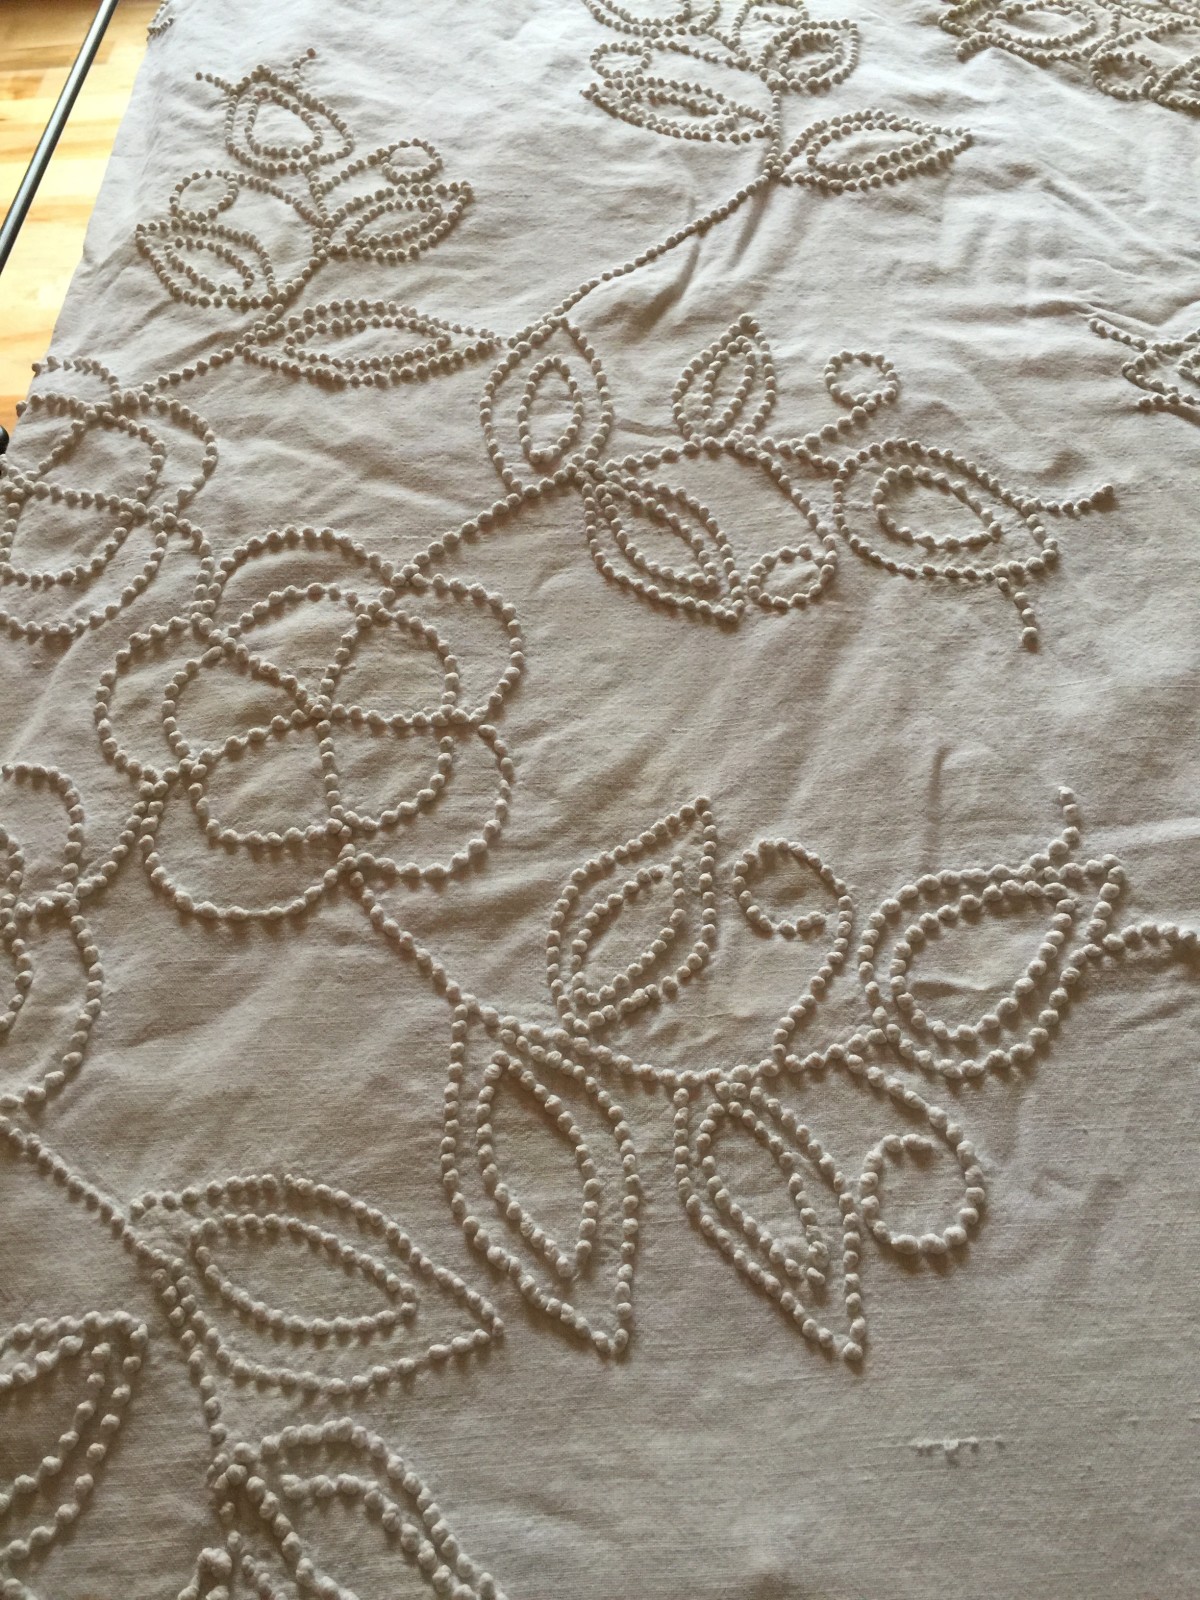 Candlewick coverlet stitched by Anna Maude Bailiff Eggers before her death in 1917 at age 40.